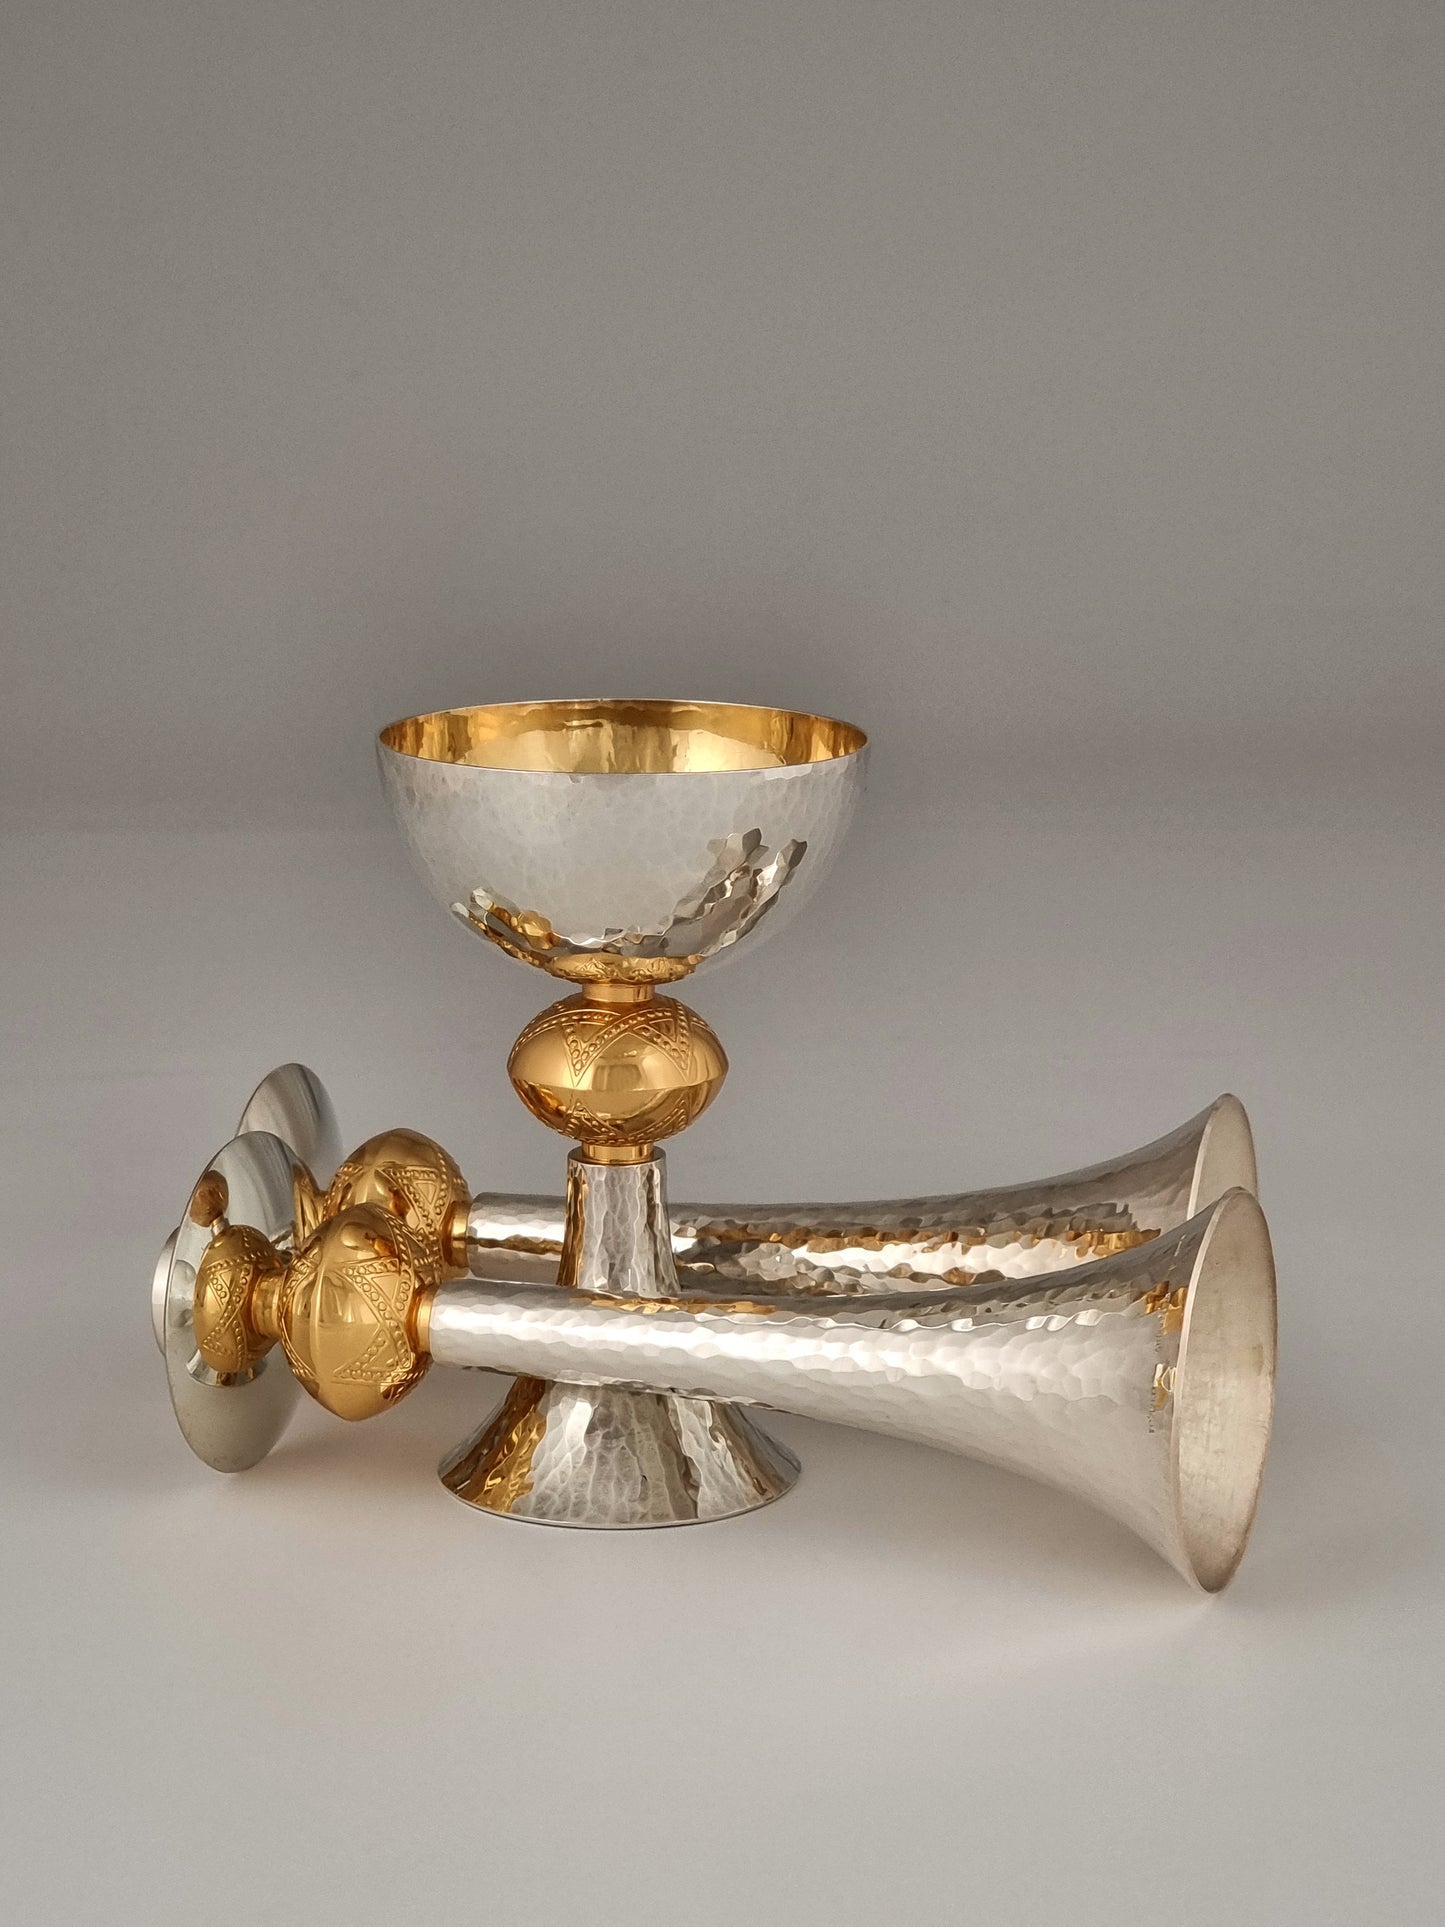 Kiddush cup with a pair of candlesticks, all bearing the star of David